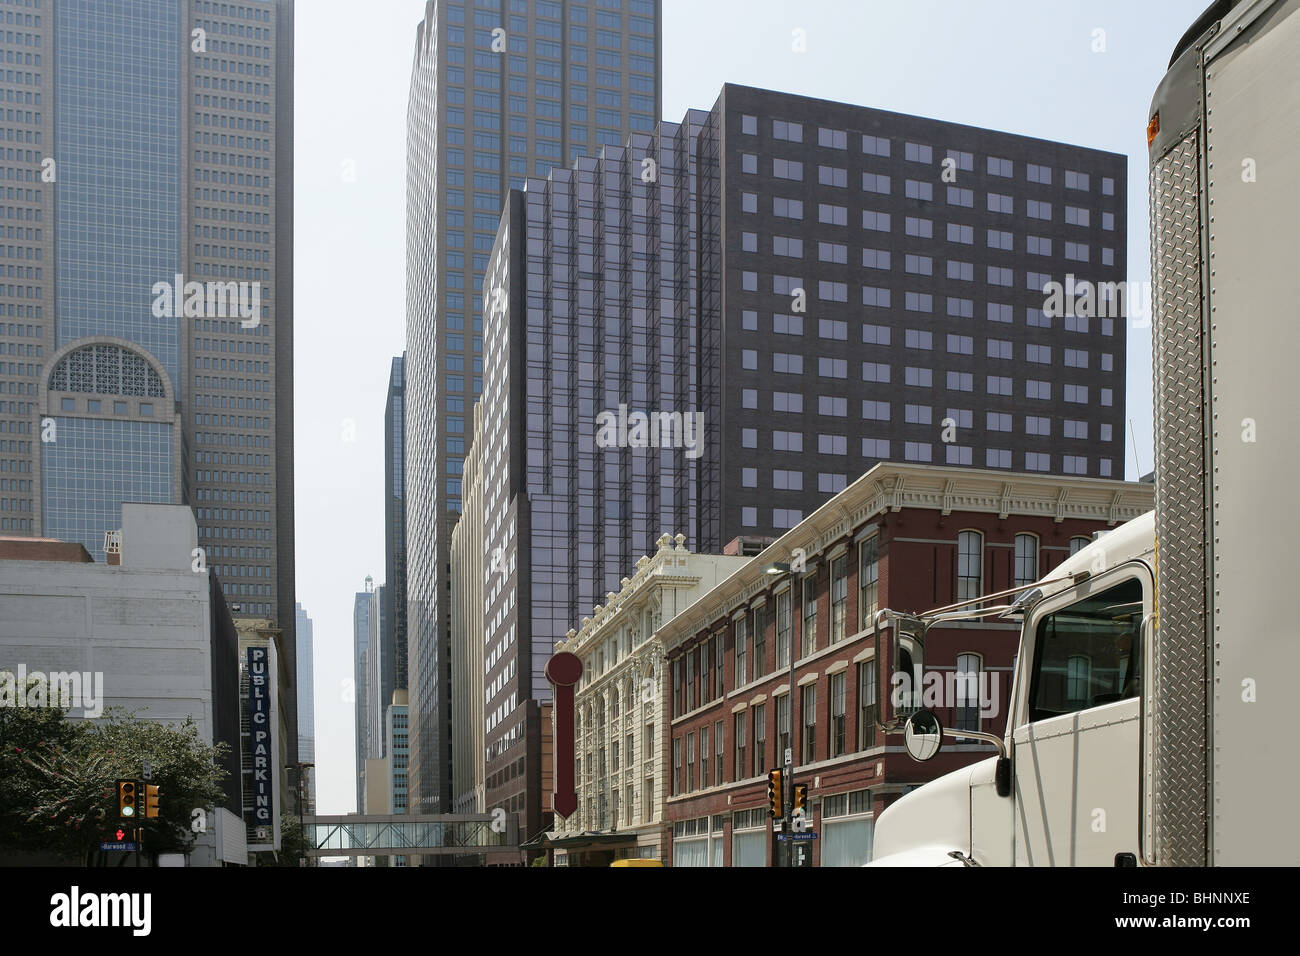 Dallas downtown city views with mixed buildings urban background Stock Photo